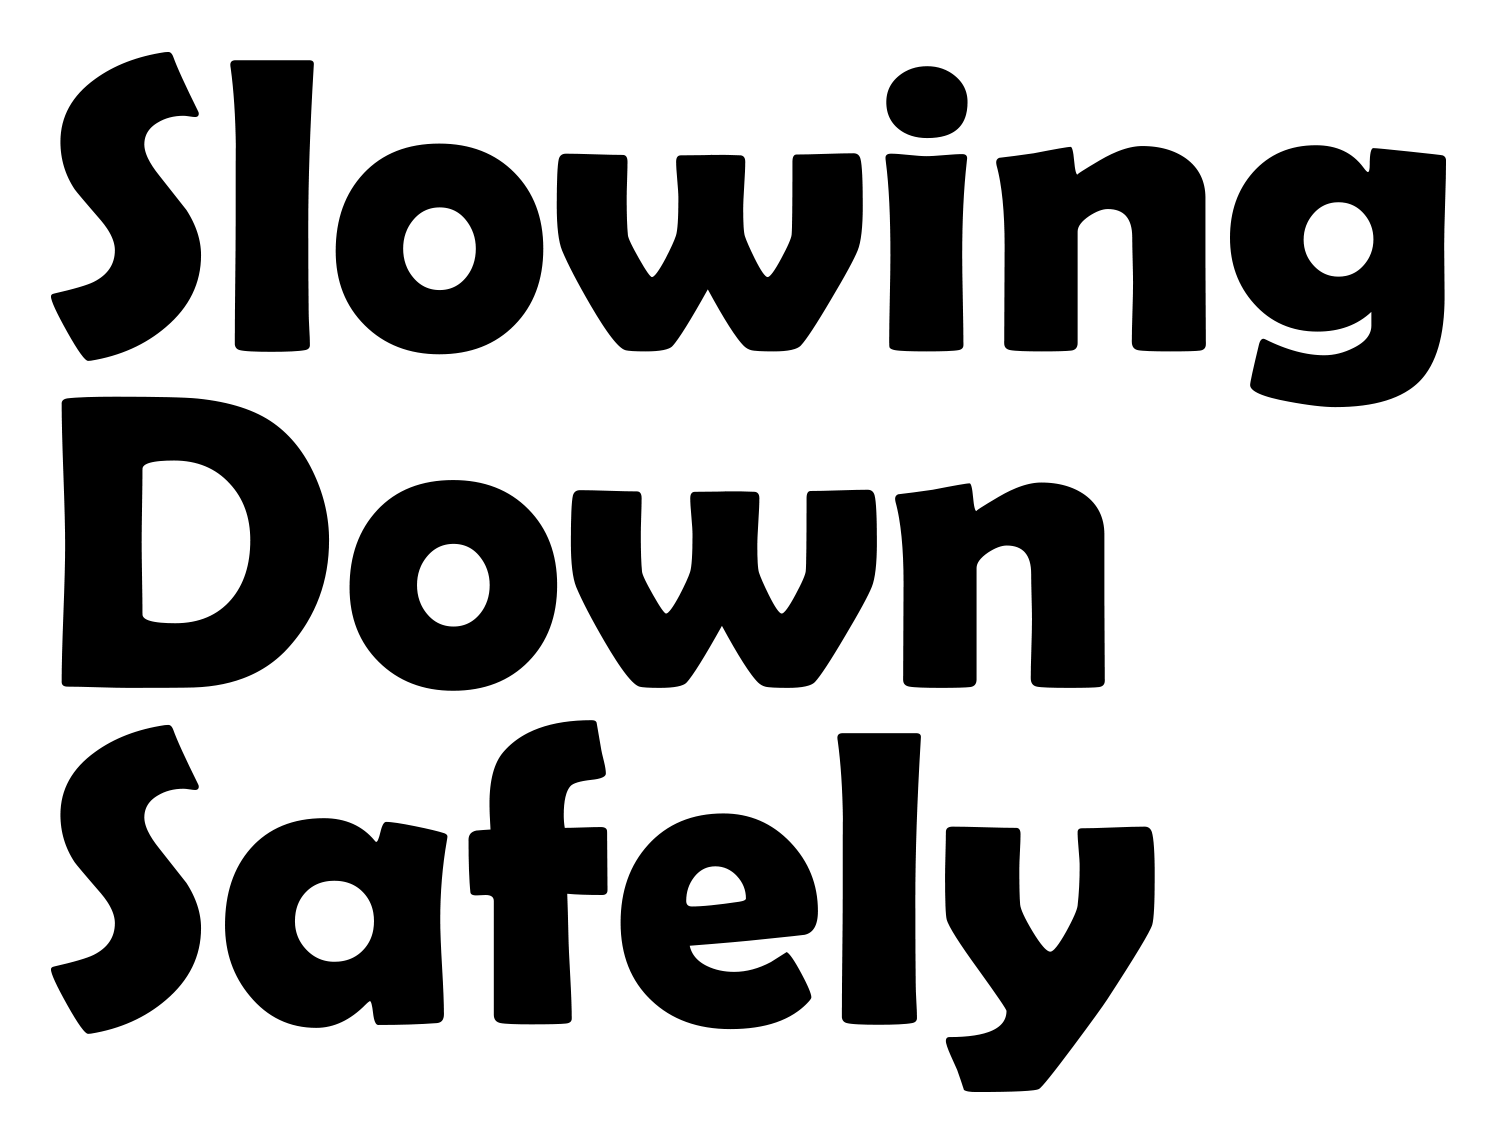 Slowing Down Safely typography